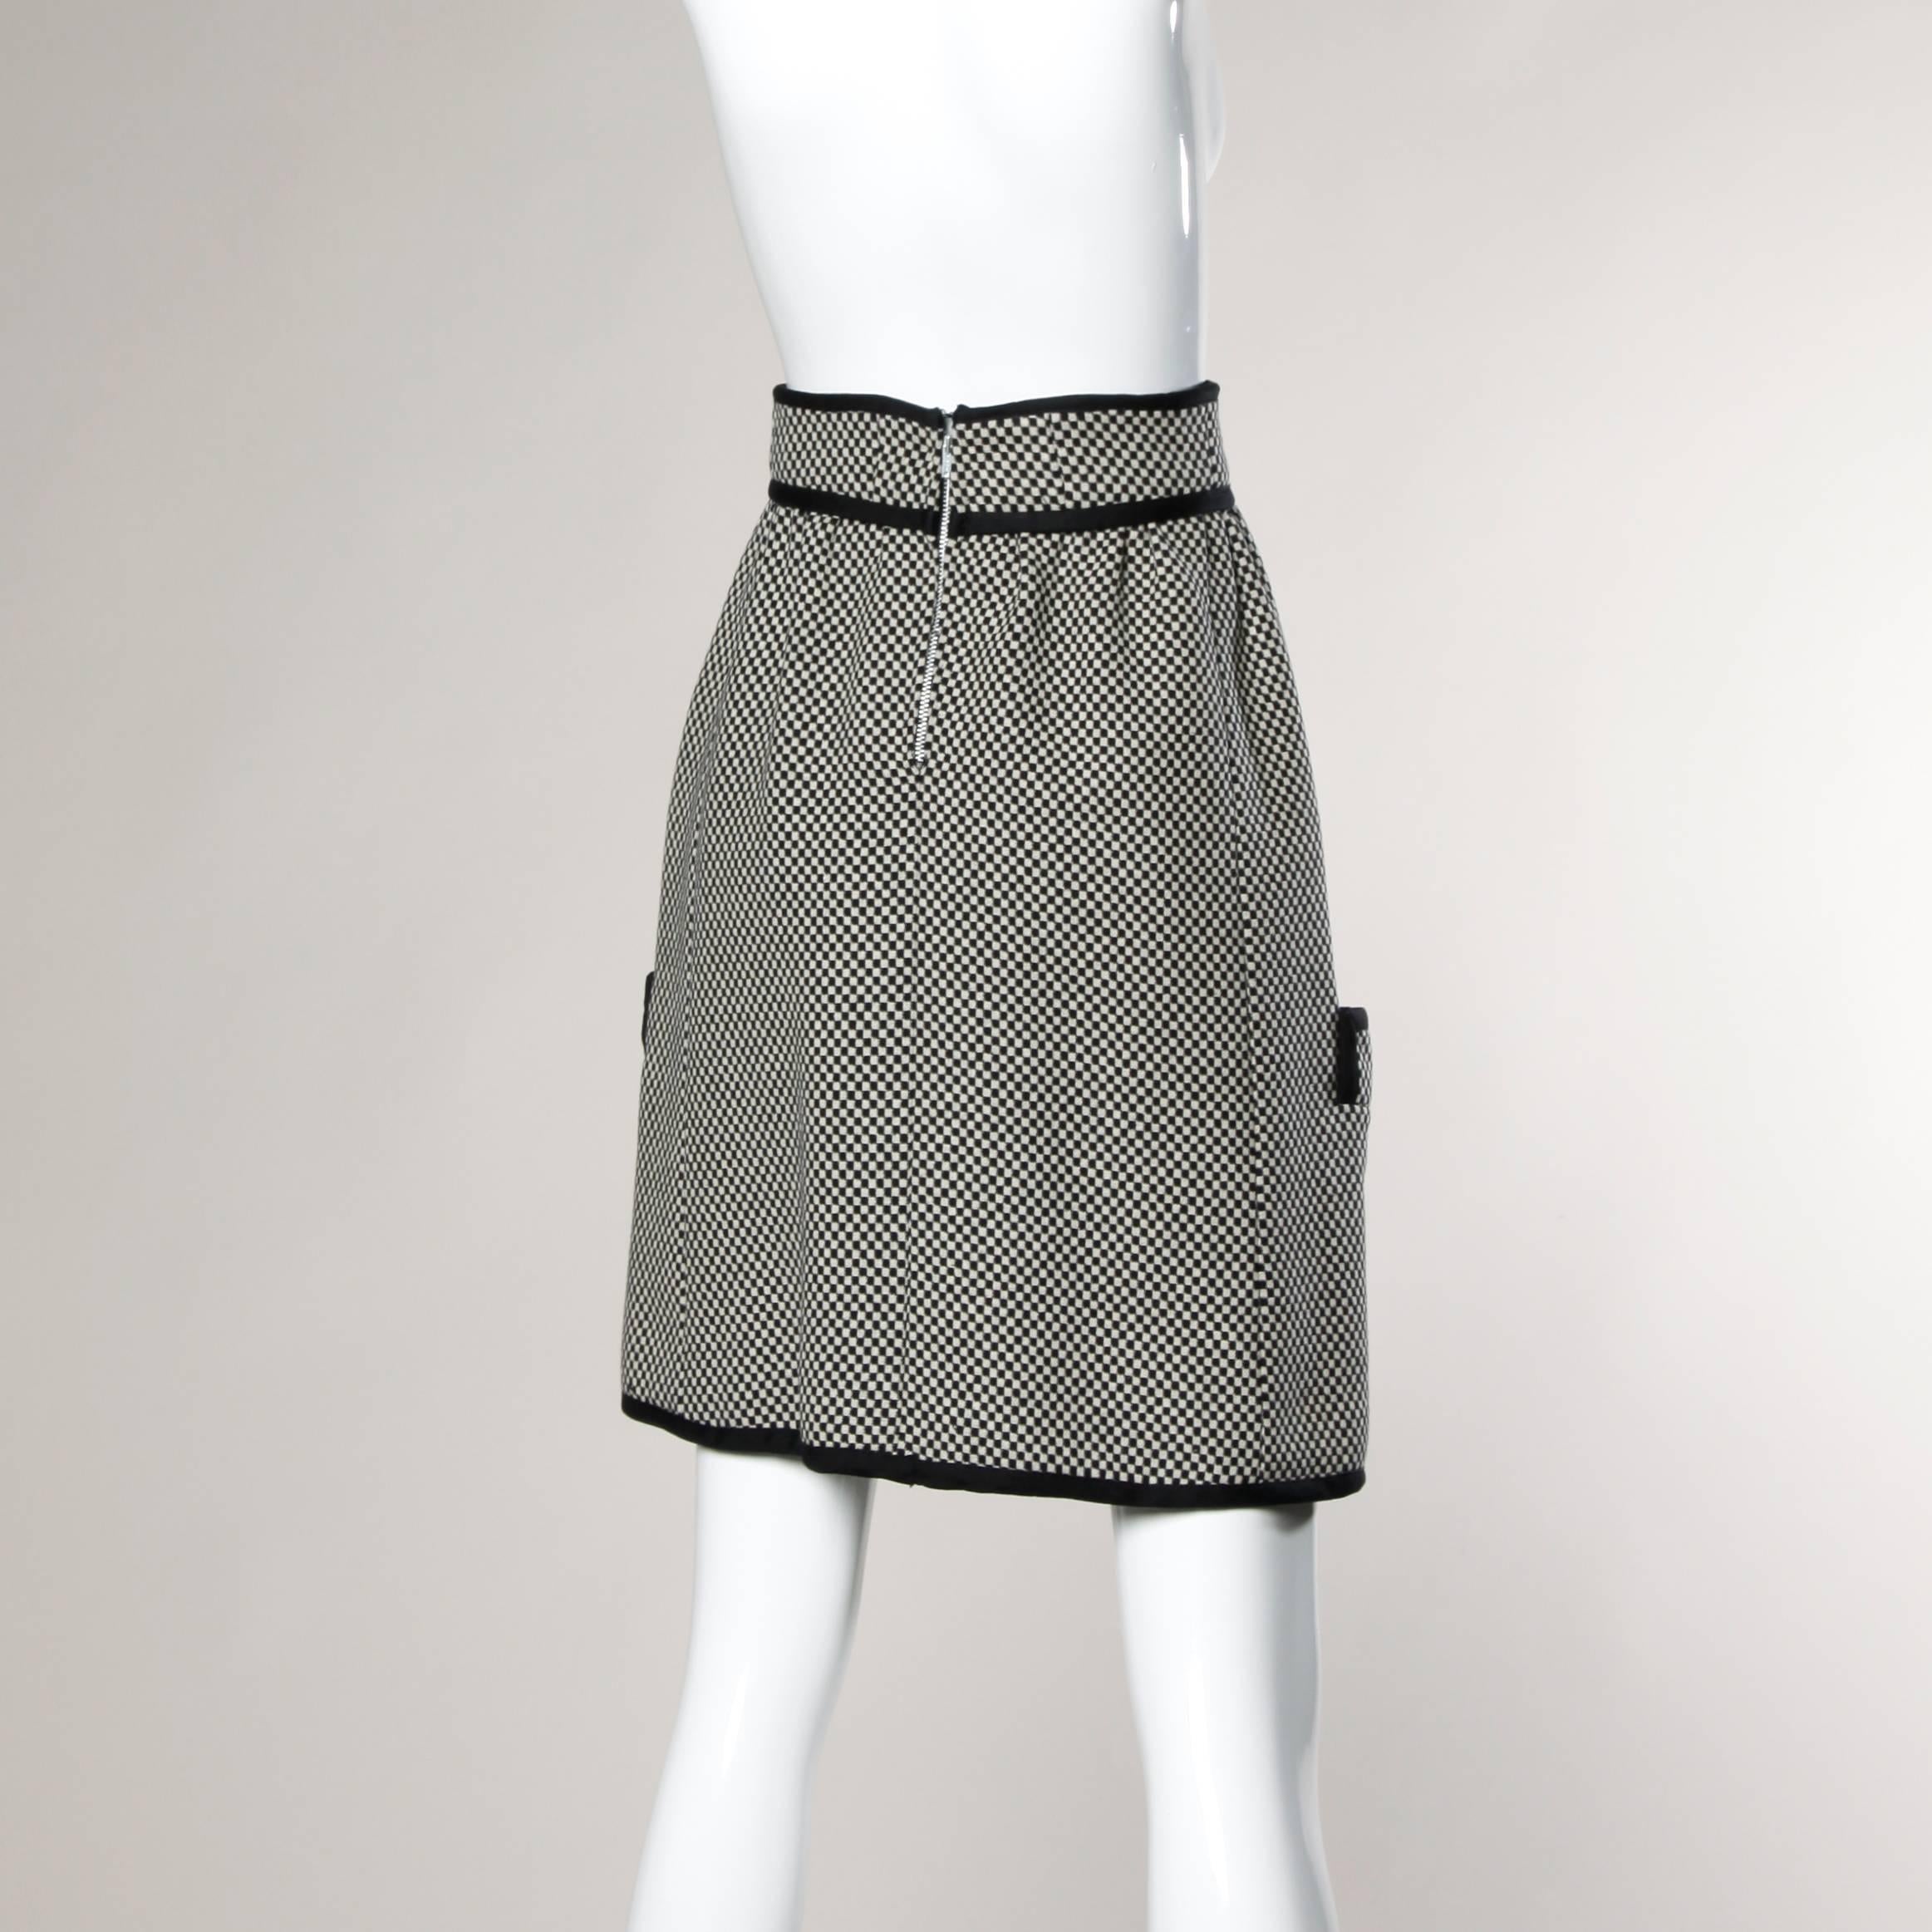 Gorgeous vintage Donald Brooks skirt in black and white checkers. Black trim and front flap pockets.

Details:

Partially Lined
Front Pockets
Back Metal Zip and Hook Closure
Marked Size: Not Marked
Estimated Size: Small
Color: Black/ White 
Fabric: